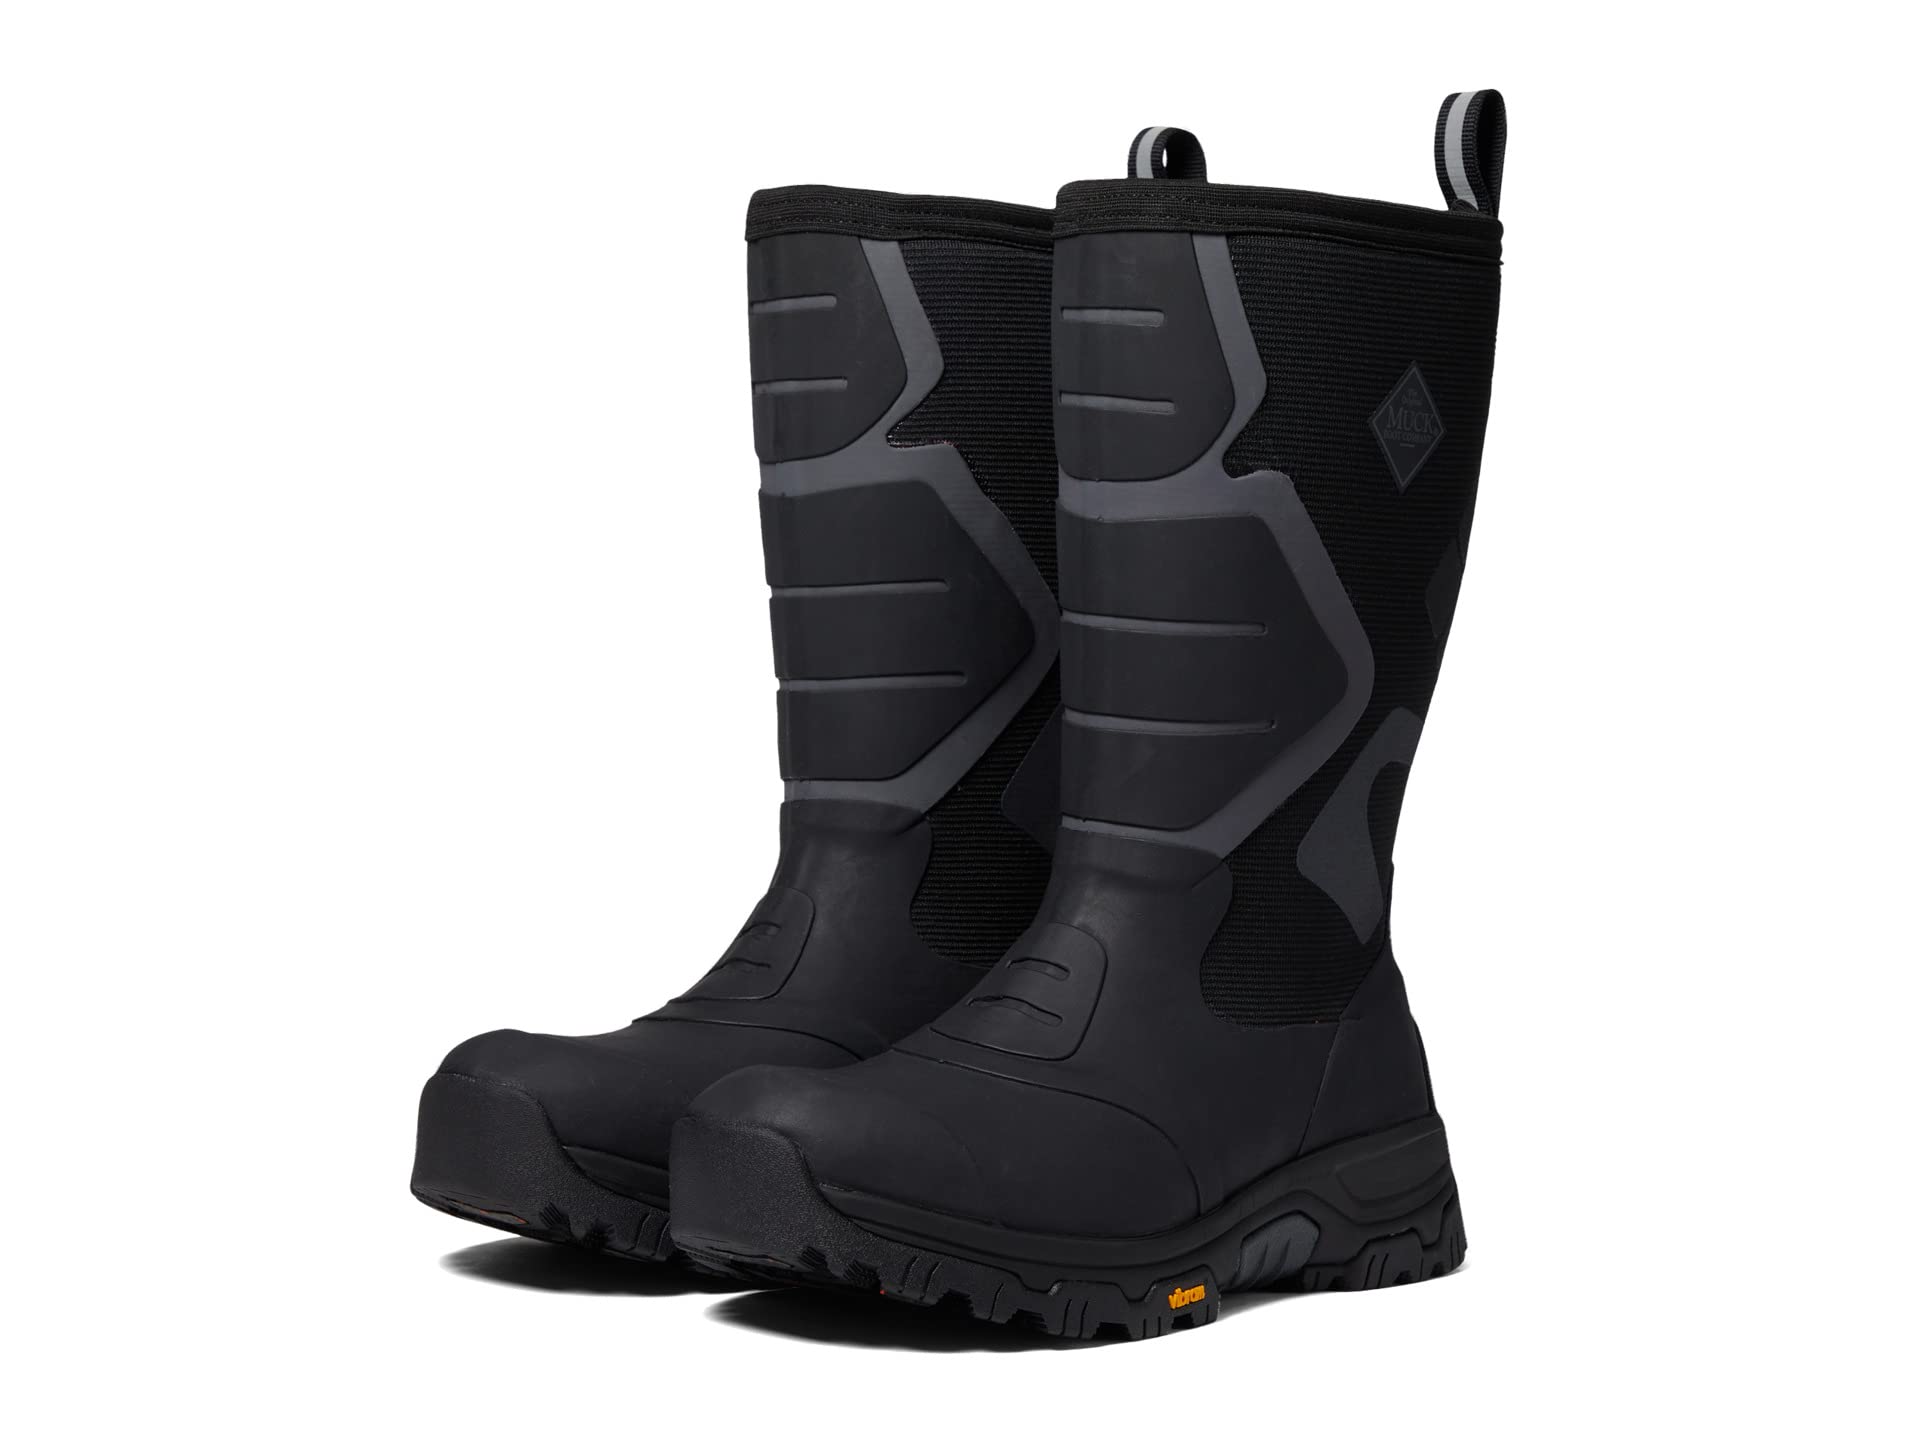 Apex PRO AG AT TL THE ORIGINAL MUCK BOOT COMPANY